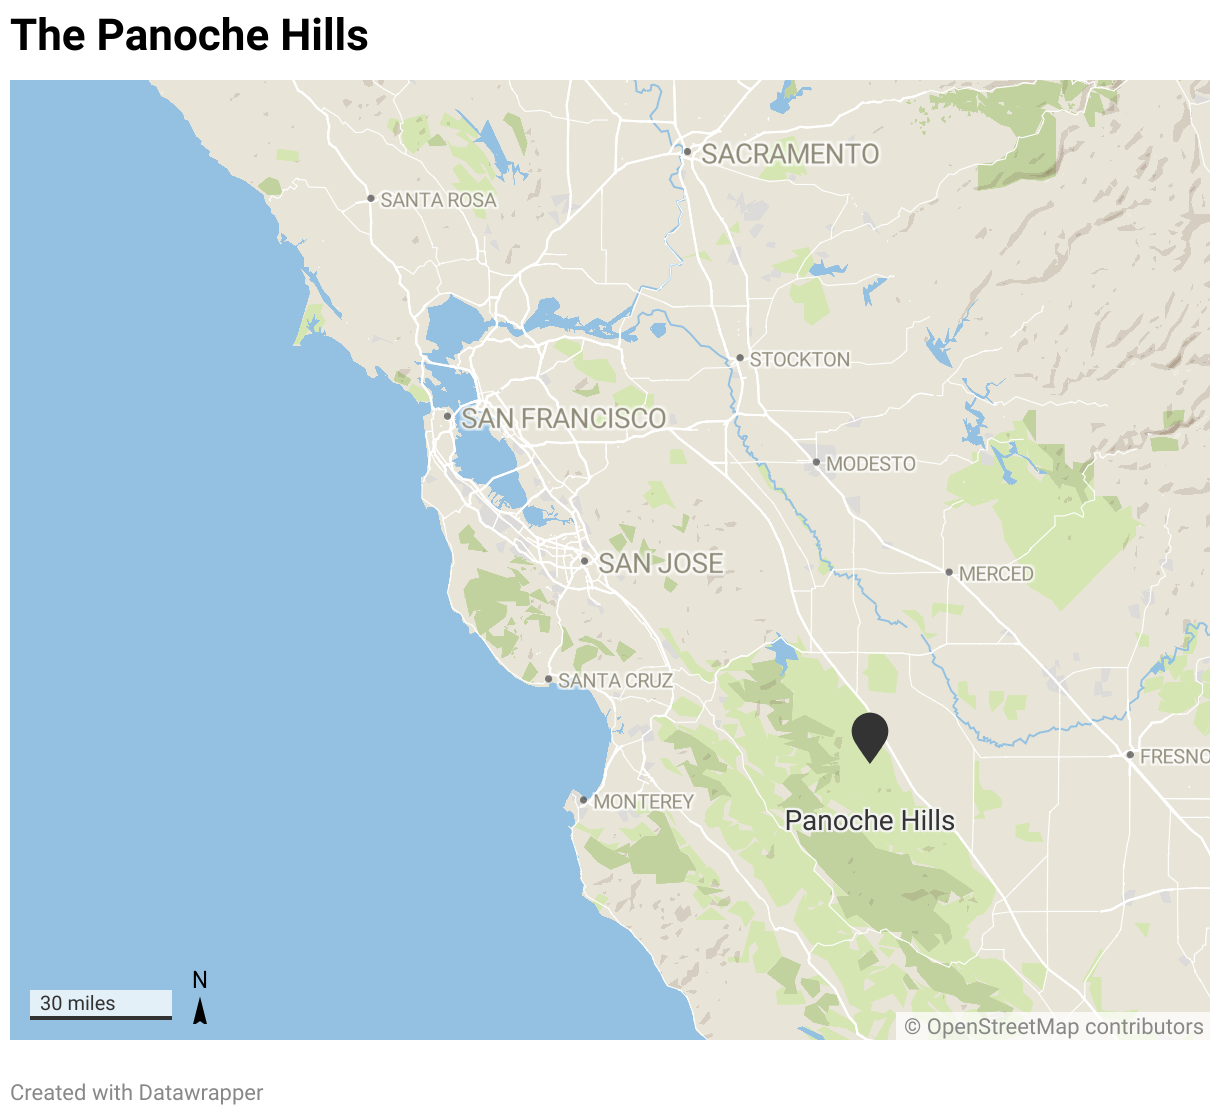 Locator map of the Panoche Hills, which are two hours southeast of San Jose, CA.